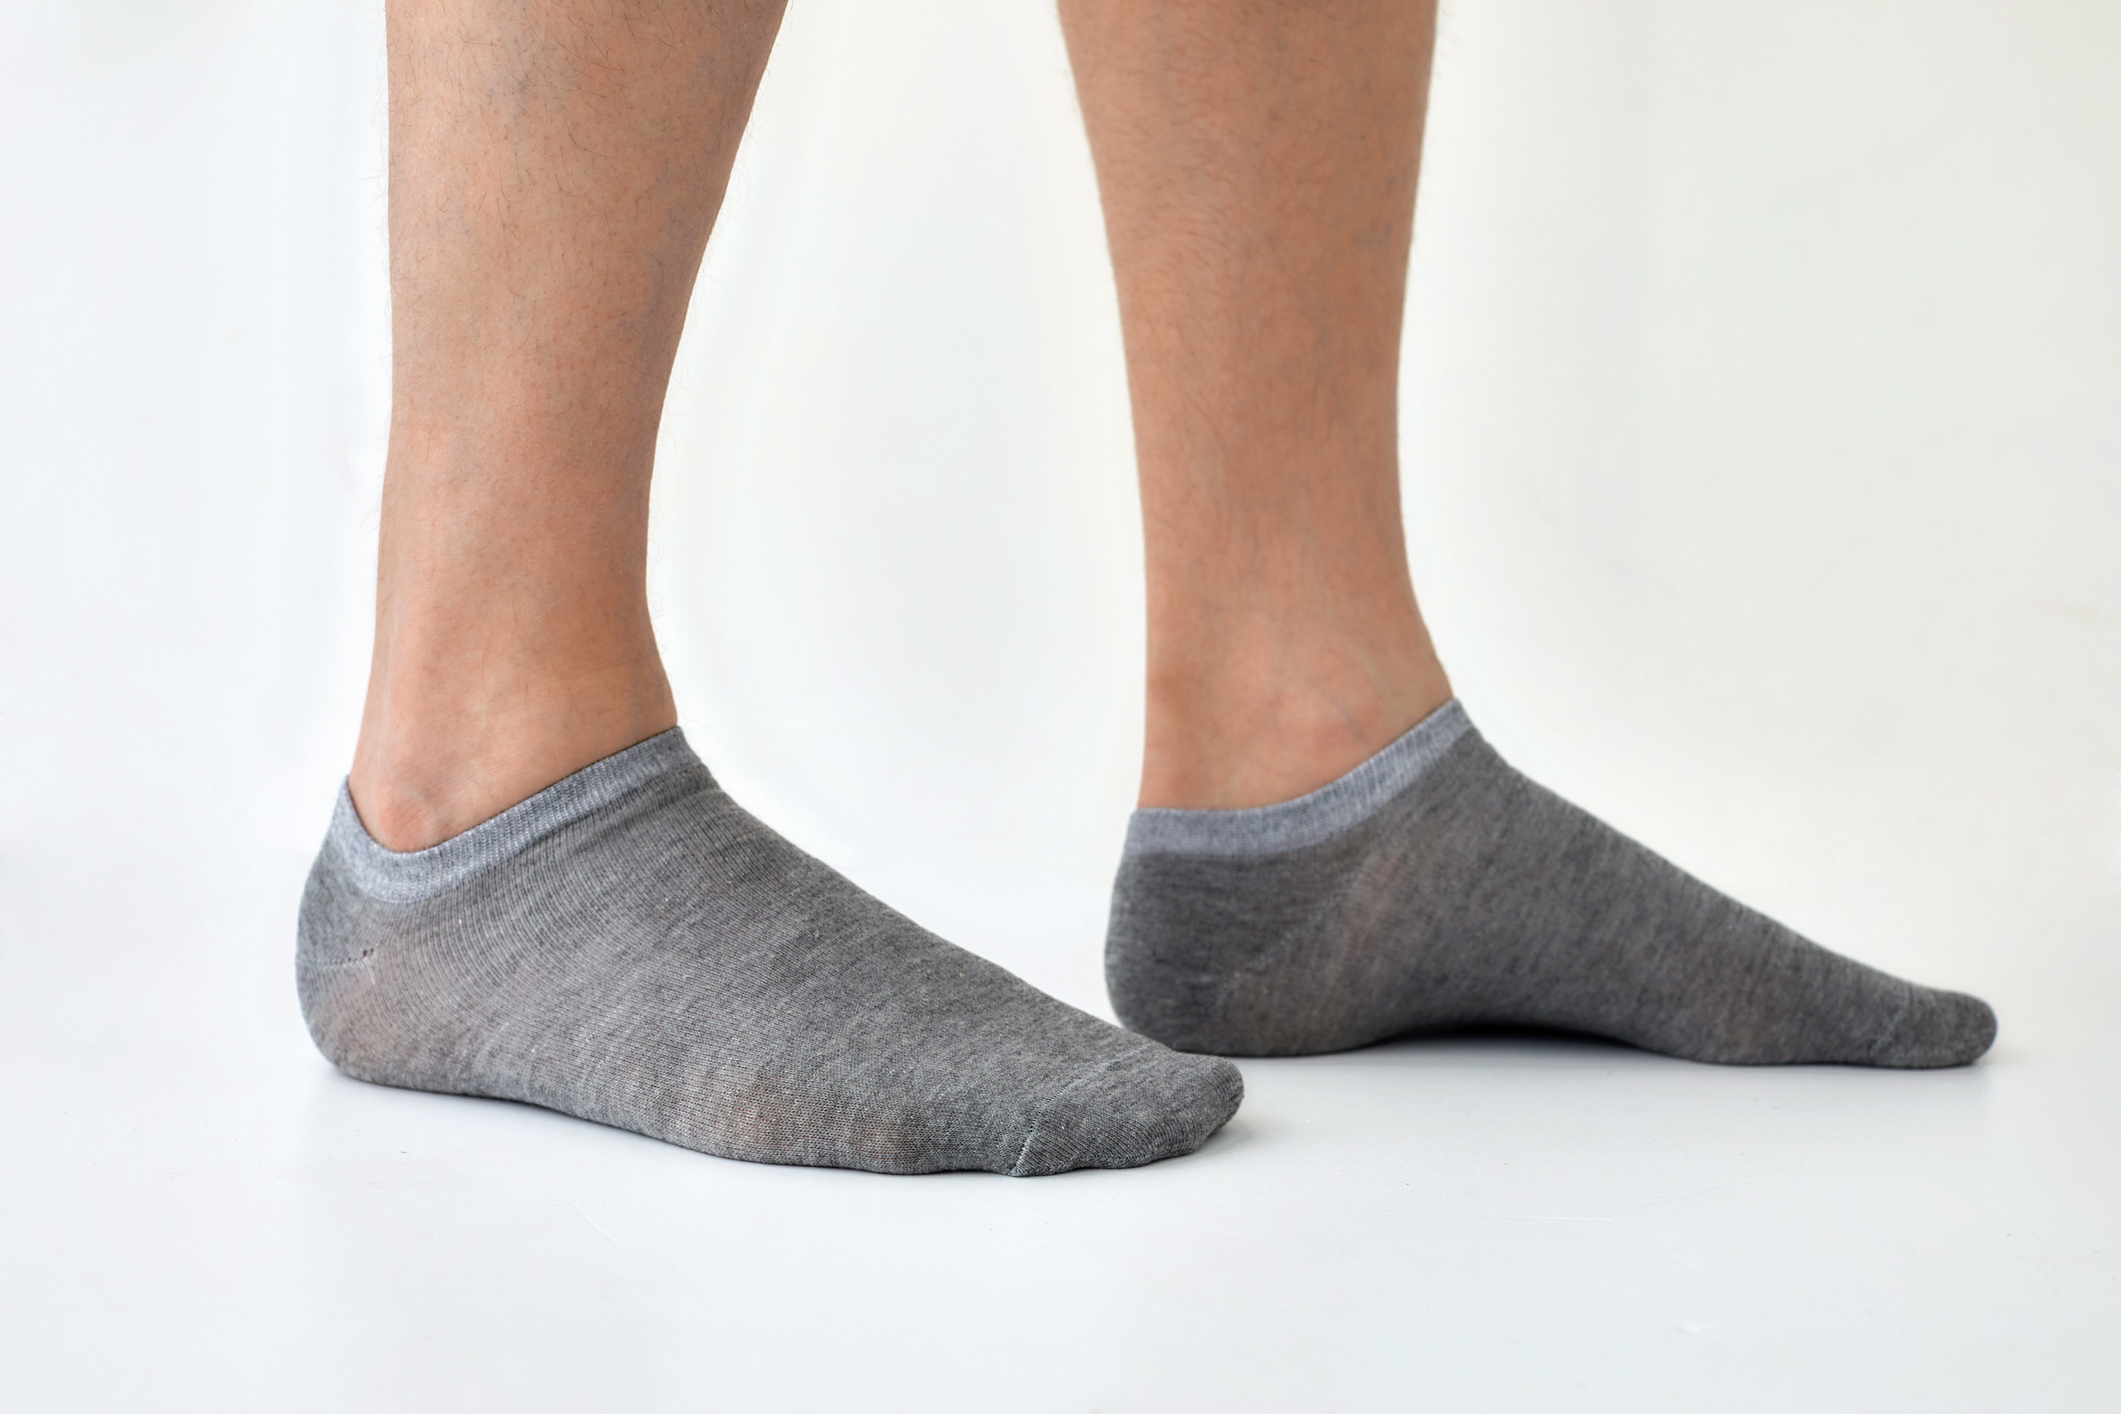 Person standing in no-show socks against a white backdrop